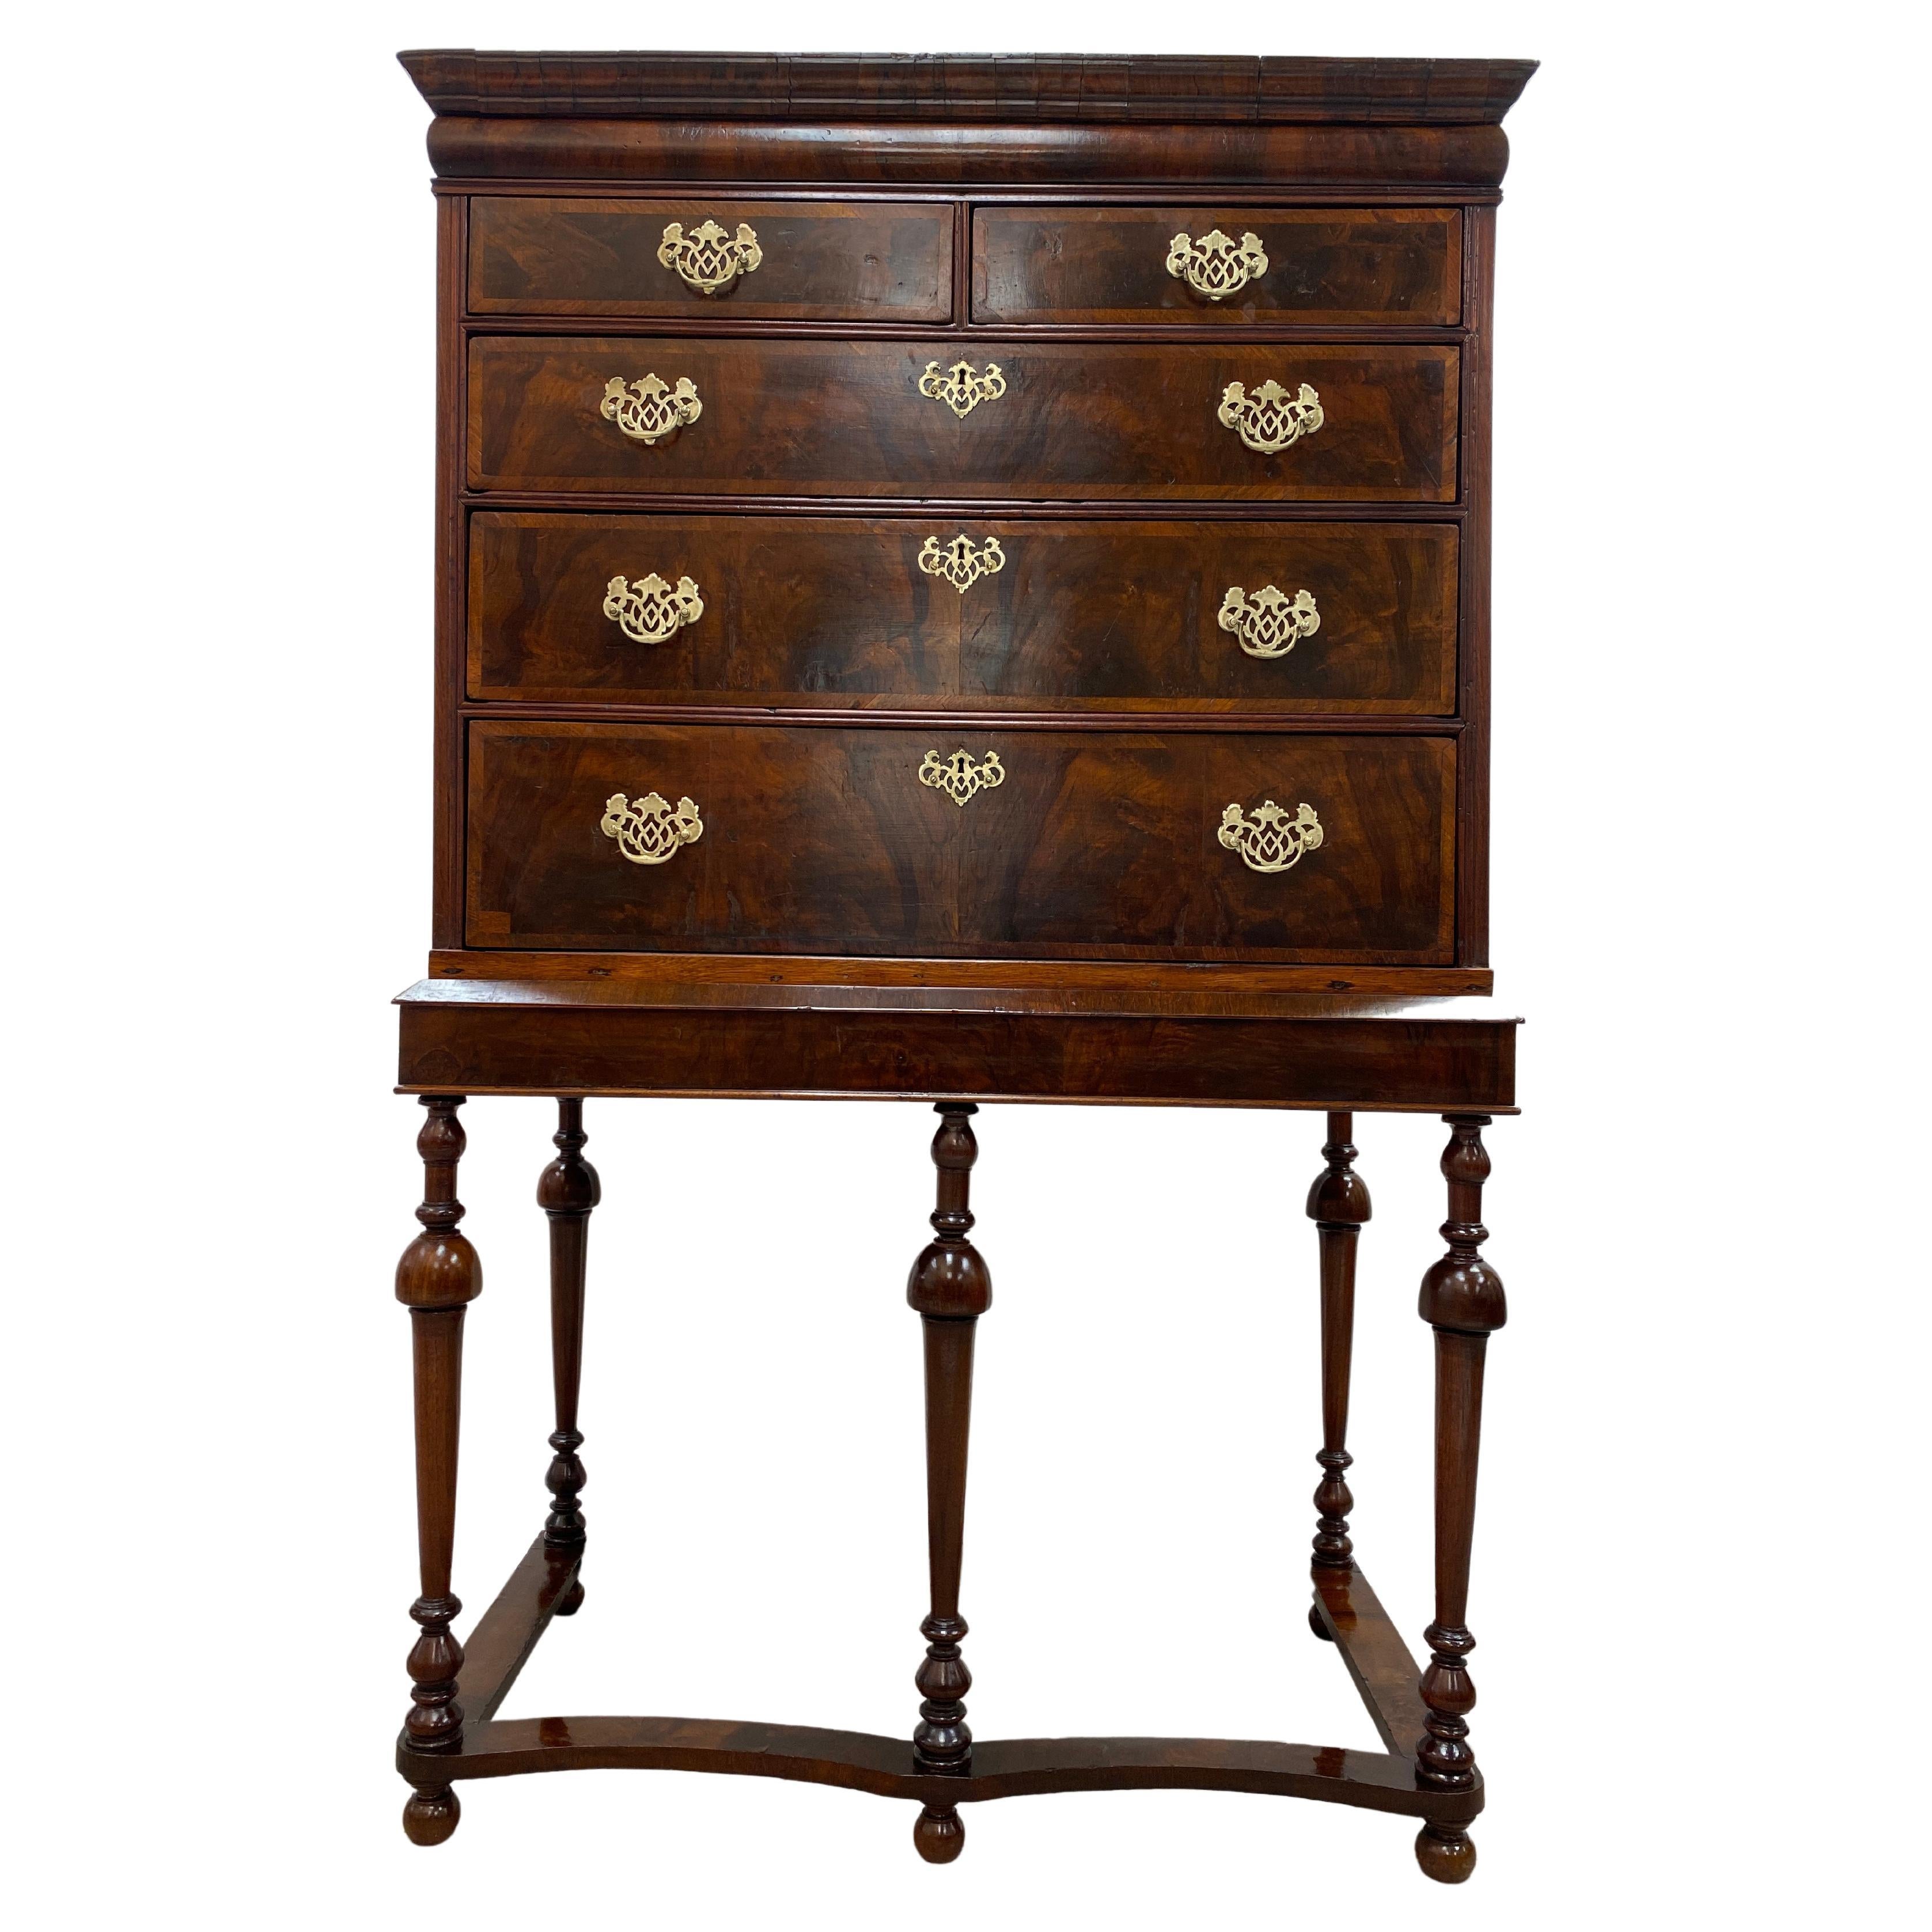 A handsome 18th century George III chest on stand containing three under two graduated drawers with brass pulls, Quartered Oak interior. Walnut and feather banding veneer work on the drawers. One single hidden top drawer. The stand is made of walnut